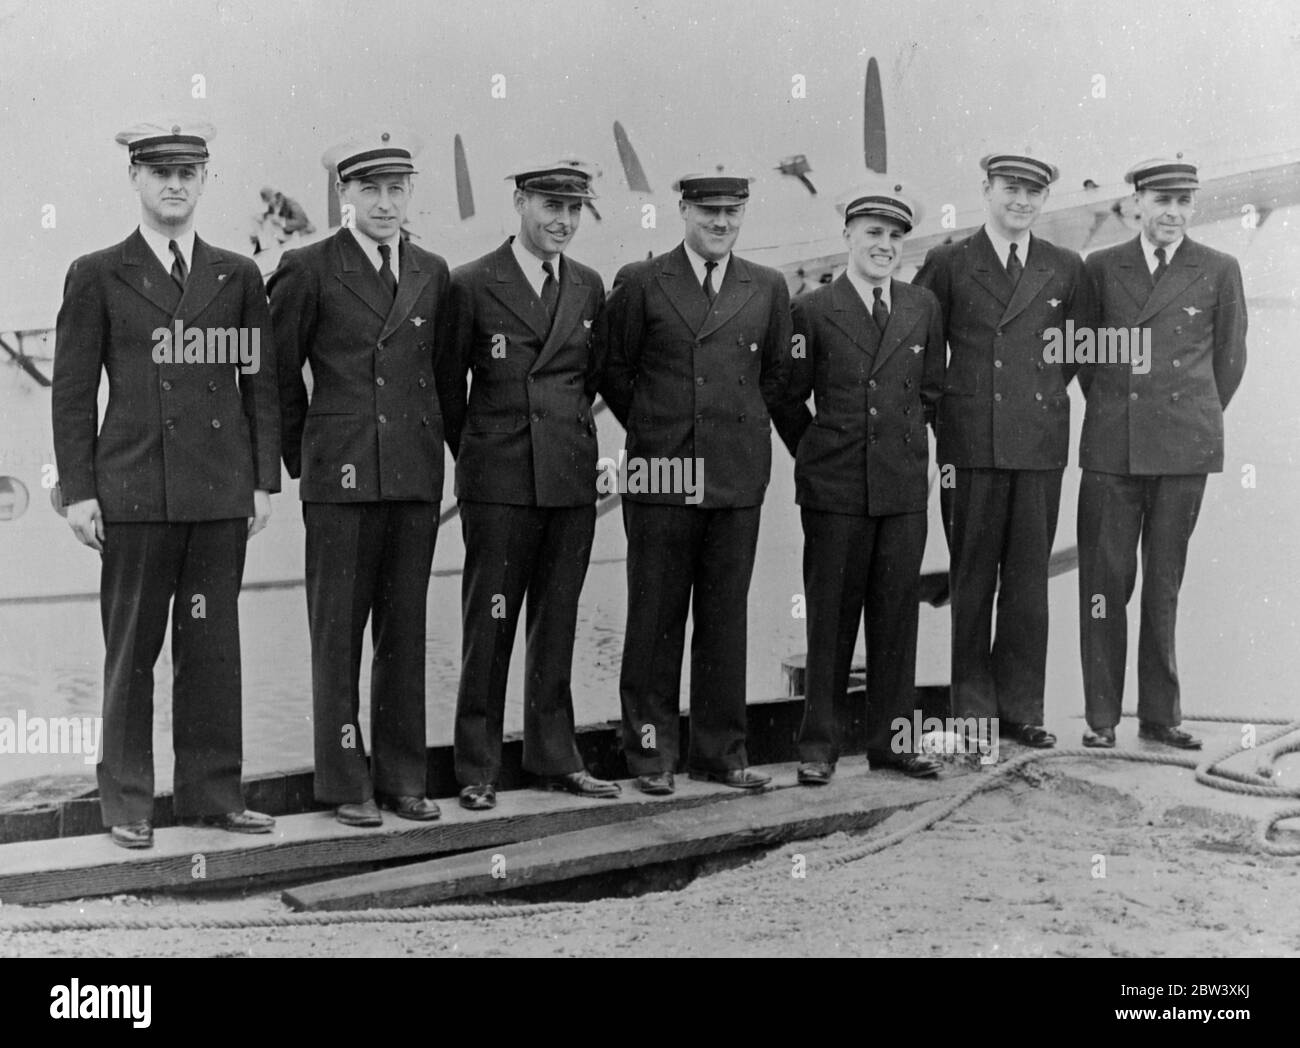 To blaze a new air trail along the 7000 miles route from California to Australia, the newest giant Sikorsky Clipper flying boat left Alameda, California, on her flight across the Pacific Ocean photo shows the crew of the Clipper plane on departure from Alameda. From left - Ivan Parker (Pruser) ; William M Holsenbeck (Junior Officer) ; Thomas R Runnels (Radio) ; Victor Wright (Flight Engineer) ; Harry A Canaday (Navigator) ; Frank Briggs (First Officer) ; Captain Edwin C Musick (Commander). March 1937 Stock Photo